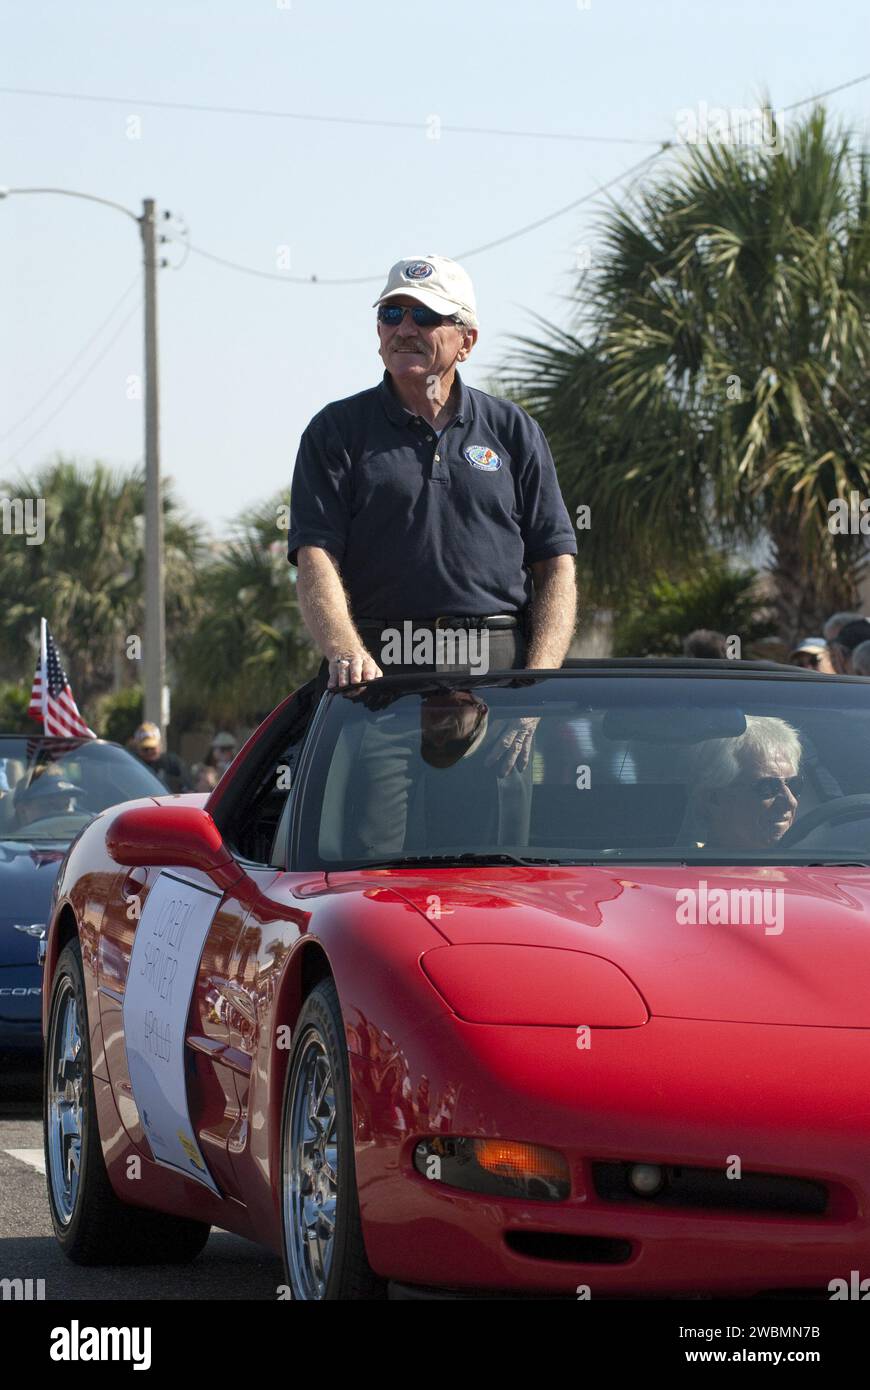 Cape Canaveral, Fla. -- Retired space shuttle astronaut Loren Shriver Hauck greets spectators from a Chevrolet Corvette during a commemorative parade in Cocoa Beach, Fla.        A group of current and retired NASA astronauts gathered in Cocoa Beach to commemorate NASA’s 50 years of accomplishments and to honor astronaut Alan Shepard’s Mercury/Freedom 7 suborbital flight May 5, 1961.The event was marked by a parade, with the astronauts riding in a fleet of Chevrolet Corvettes that corresponded with the time period of their space missions. Members of the Cape Kennedy Corvette Club, a group estab Stock Photo